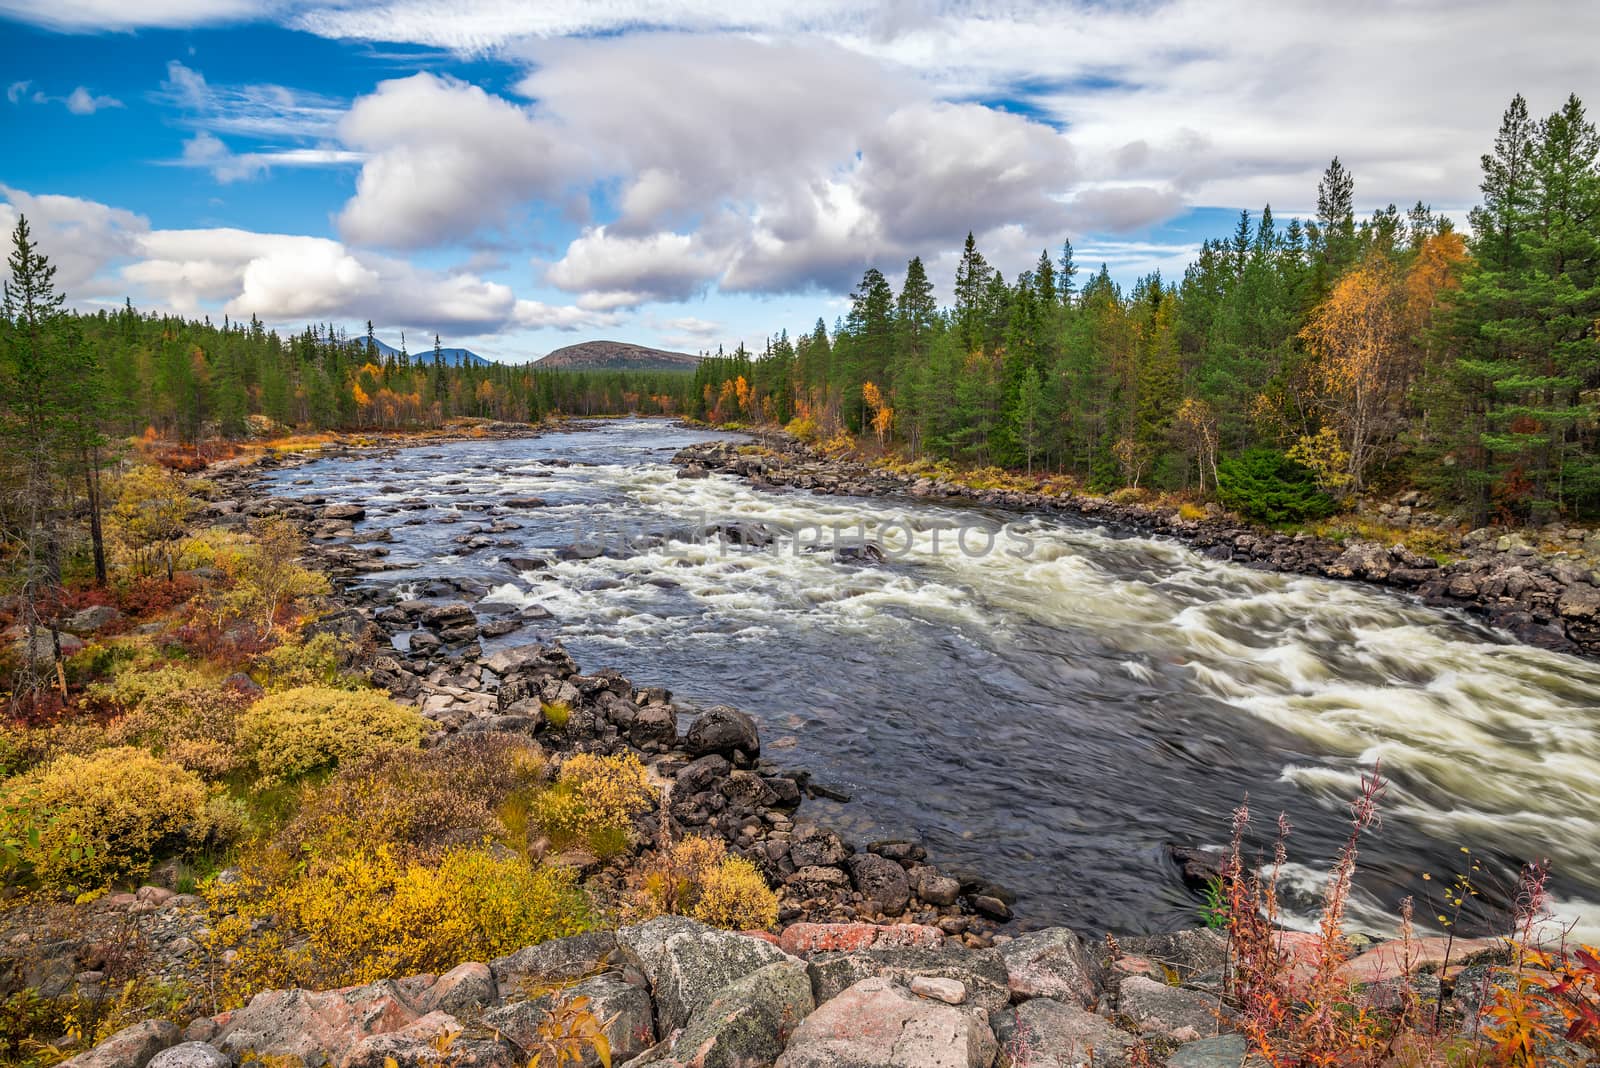 Klaralven river near Engerdal, Norway. It is the longest river in Scandinavia and its Swedish part the longest river of Sweden.